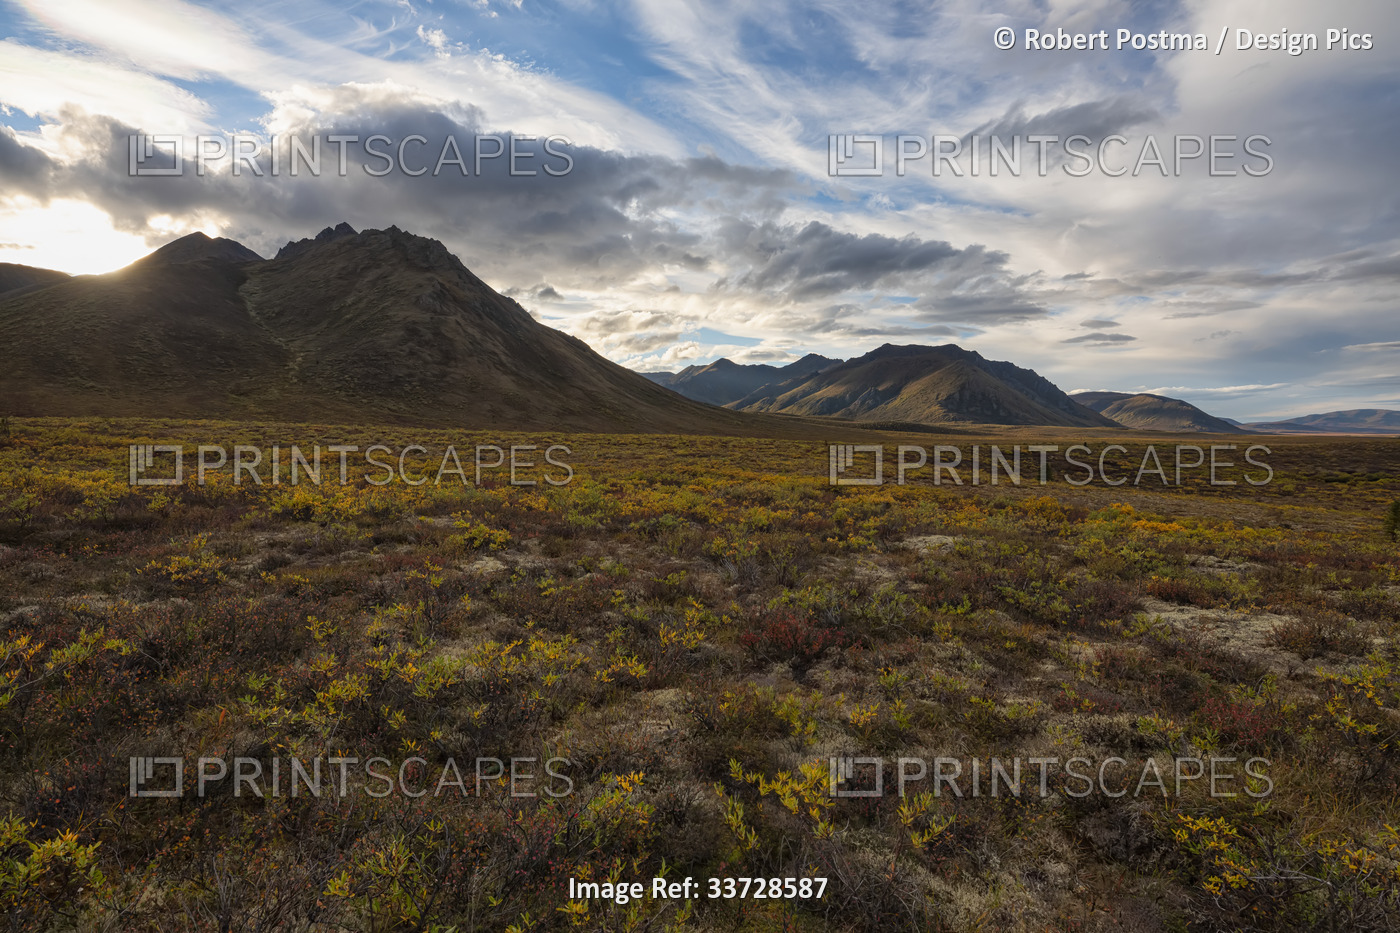 Sunset light illuminates the mountains and landscape of the Dempster Highway in ...